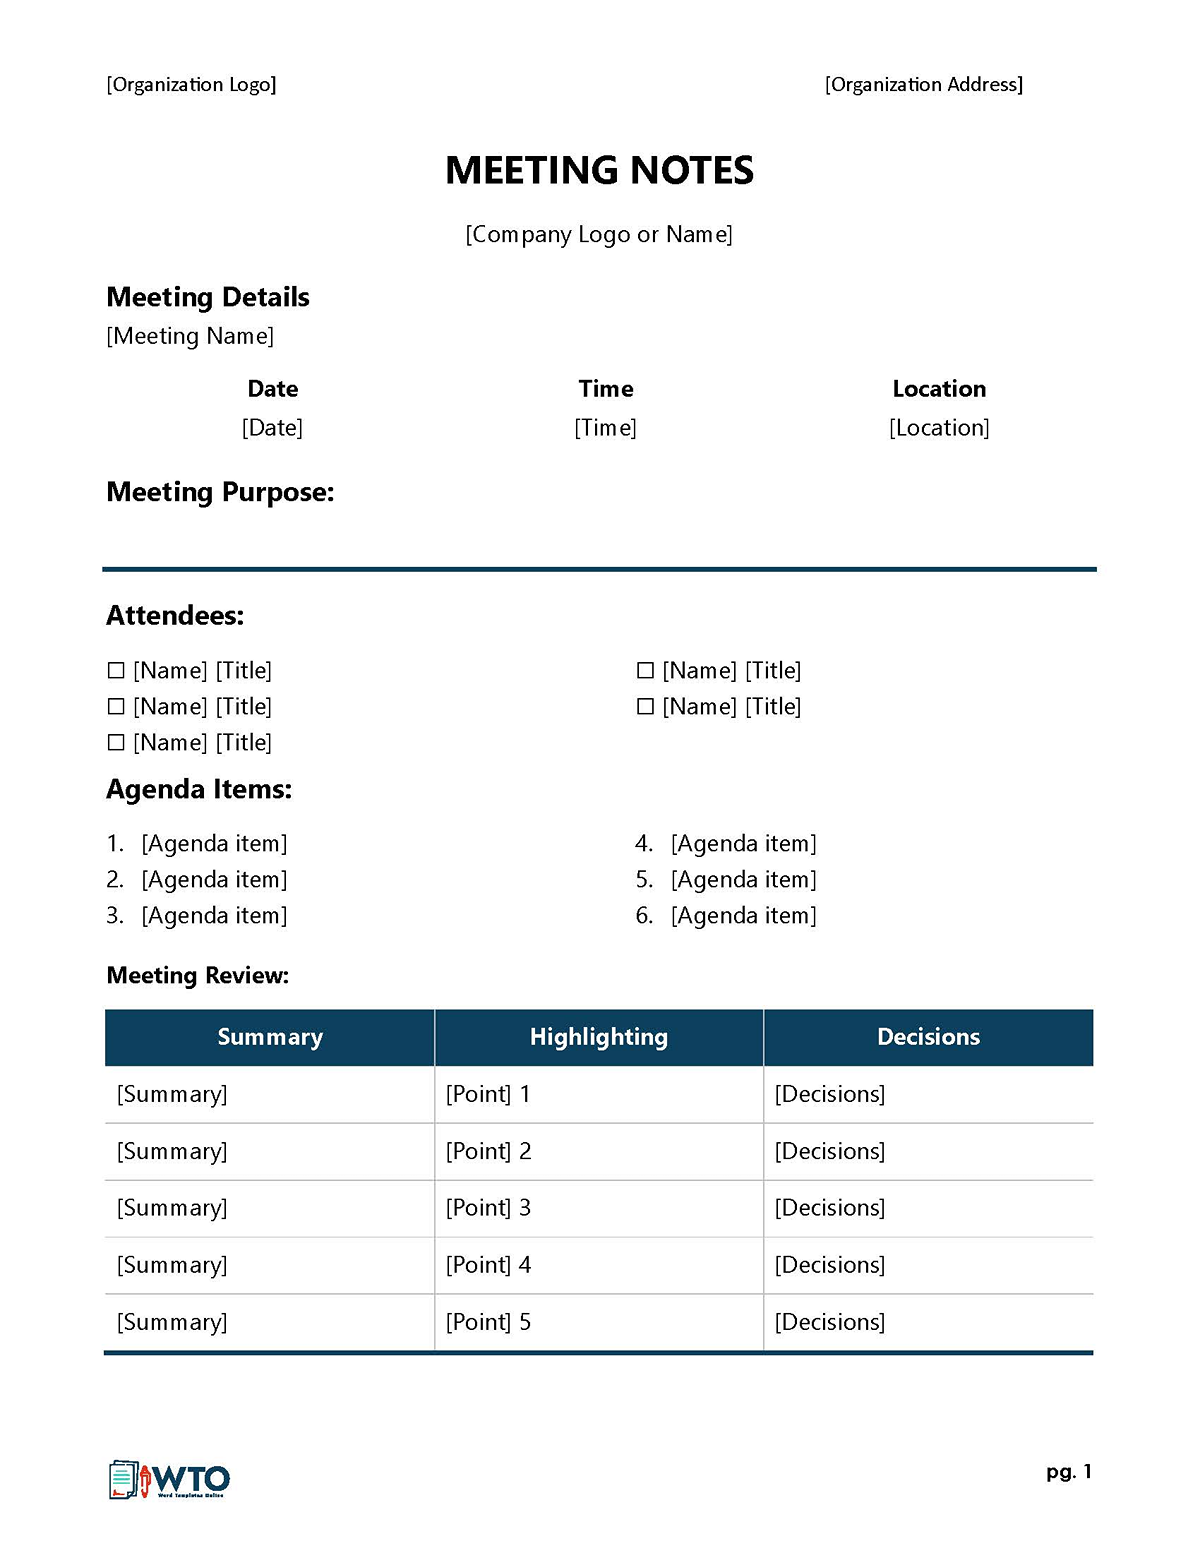 Meeting Agenda Template - Efficient and Organized